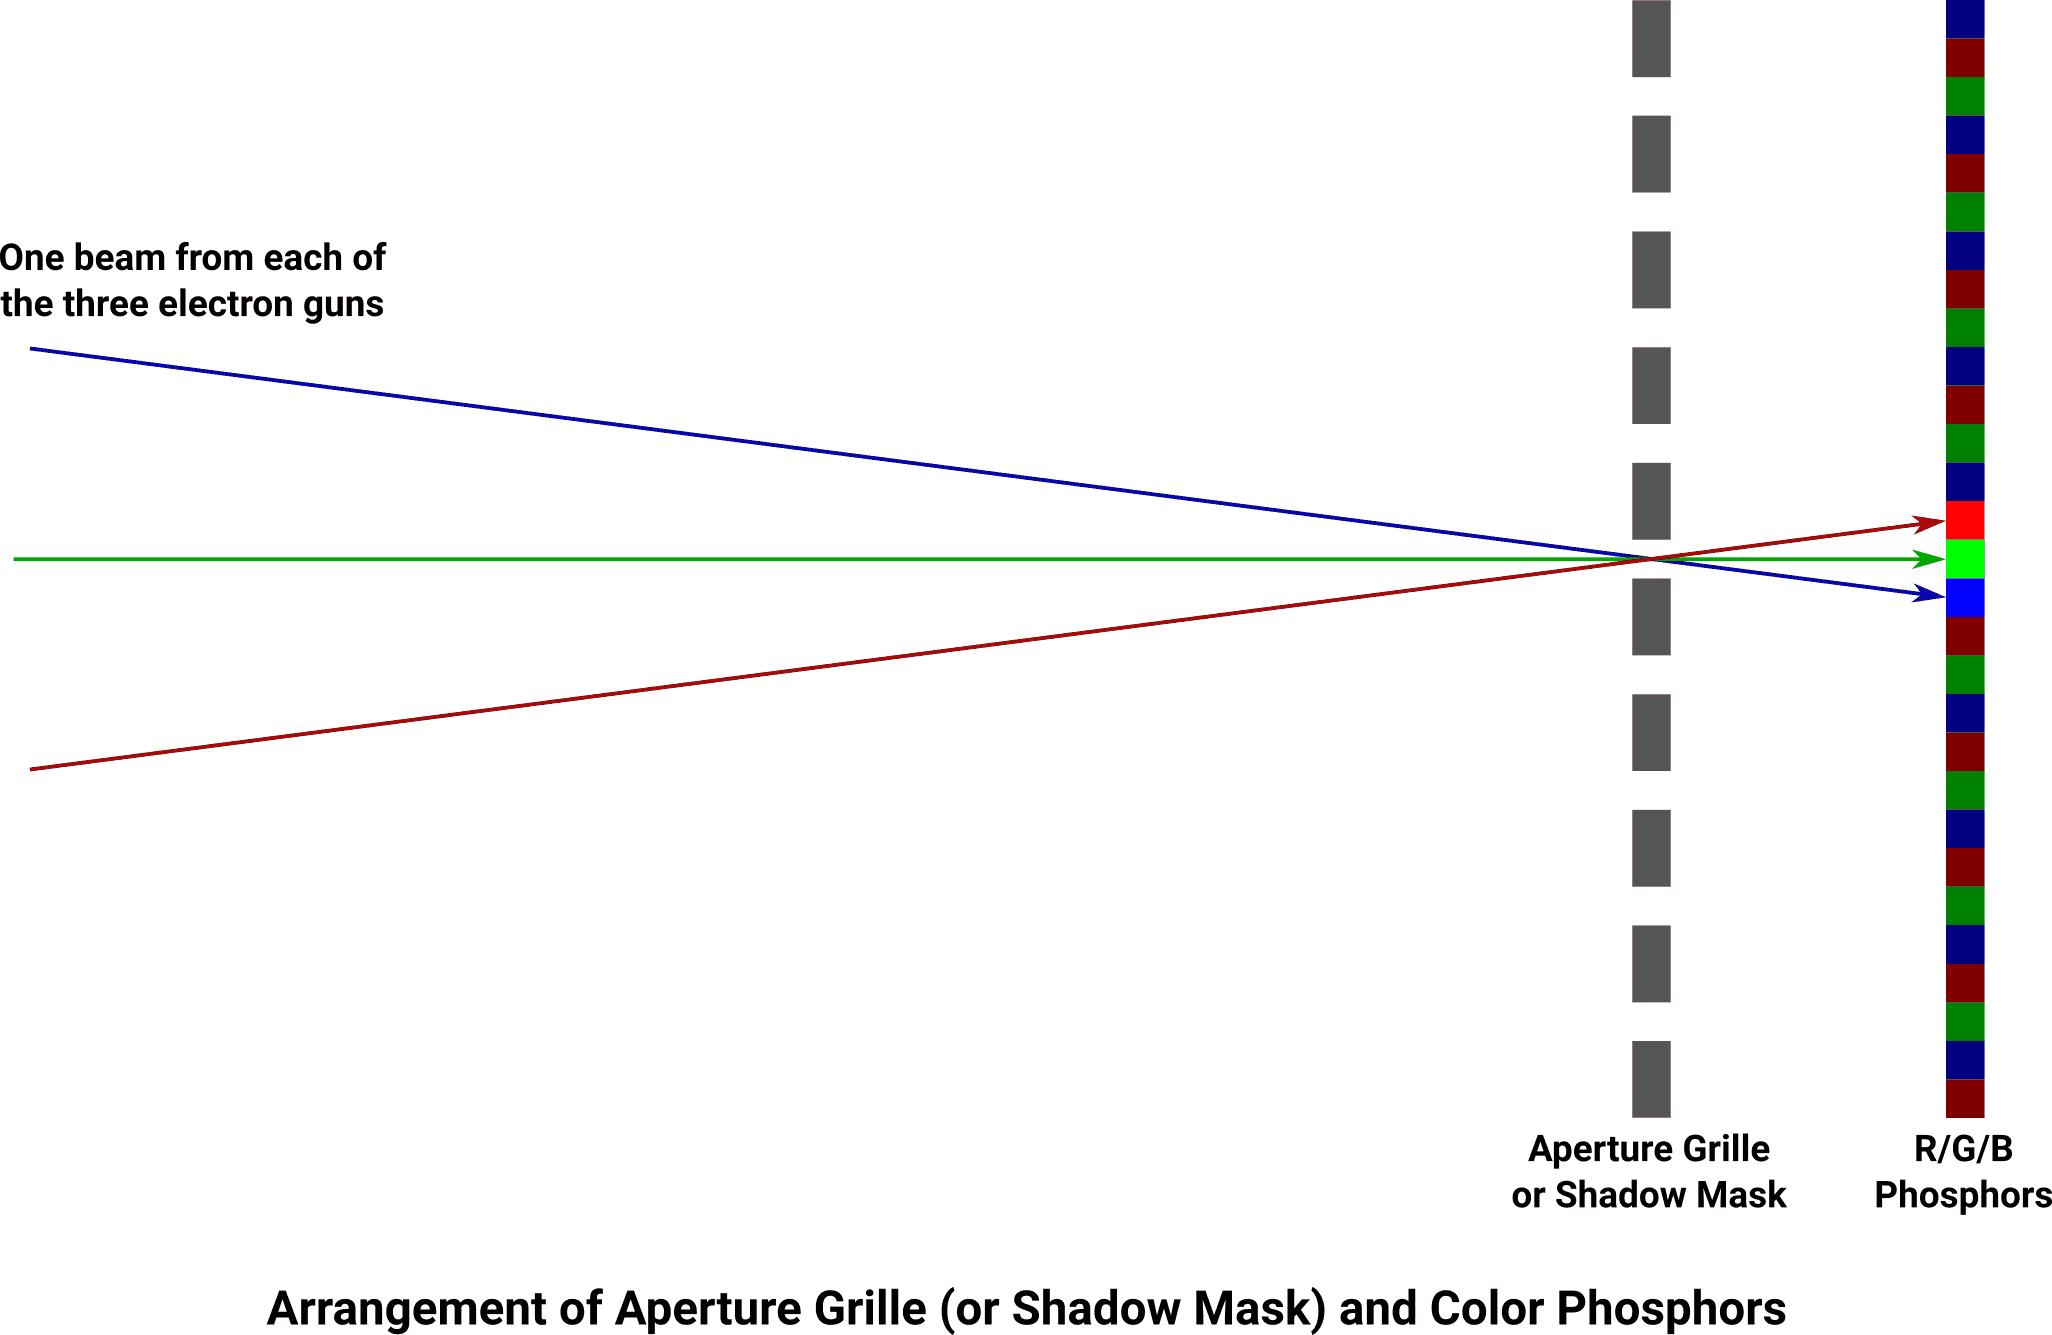 Arrangement of aperture grille (or shadow mask) and color phosphors.